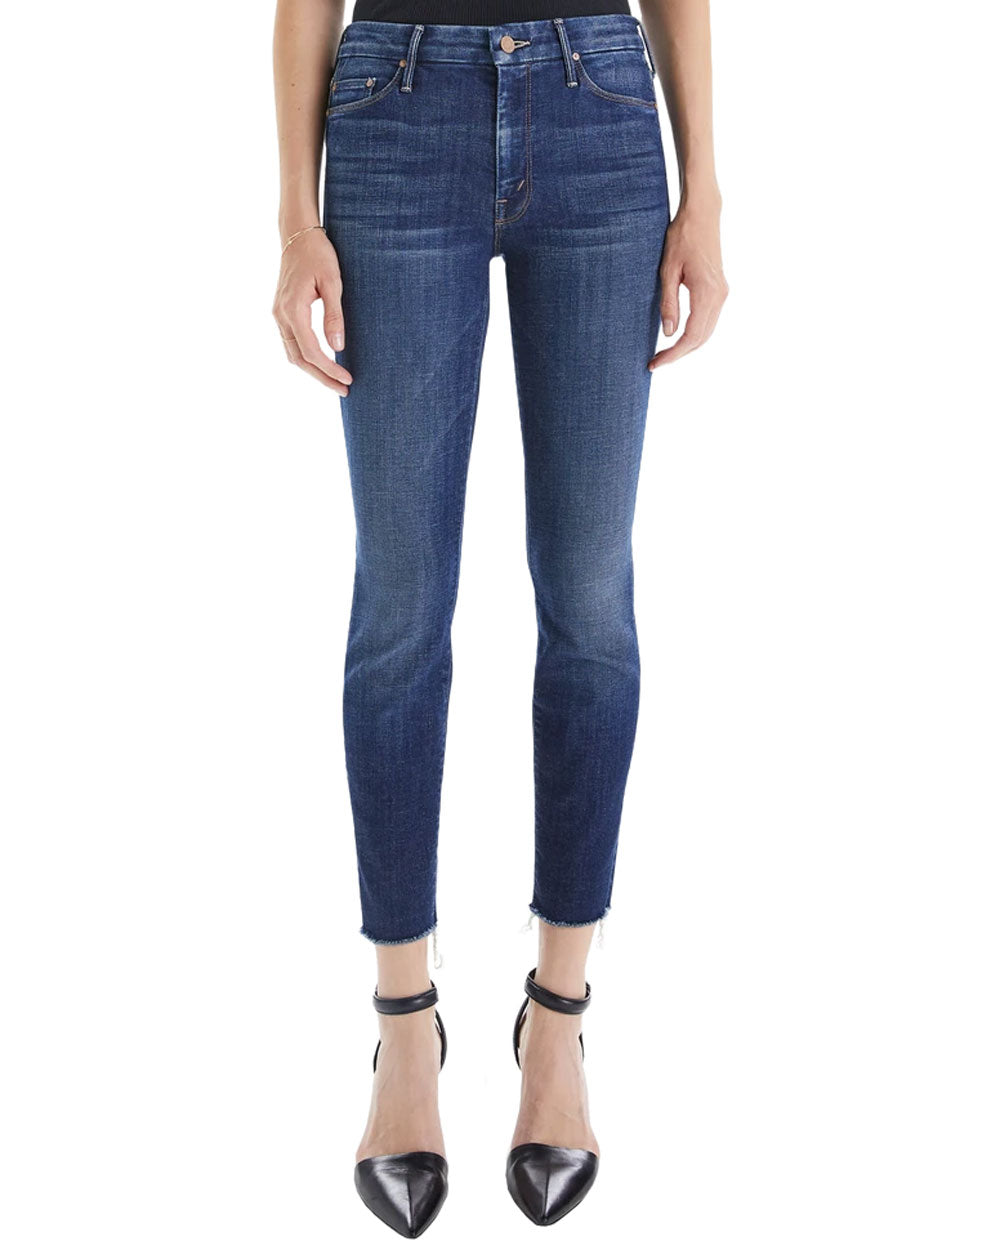 The Looker Ankle Fray Jean in Lust For Life